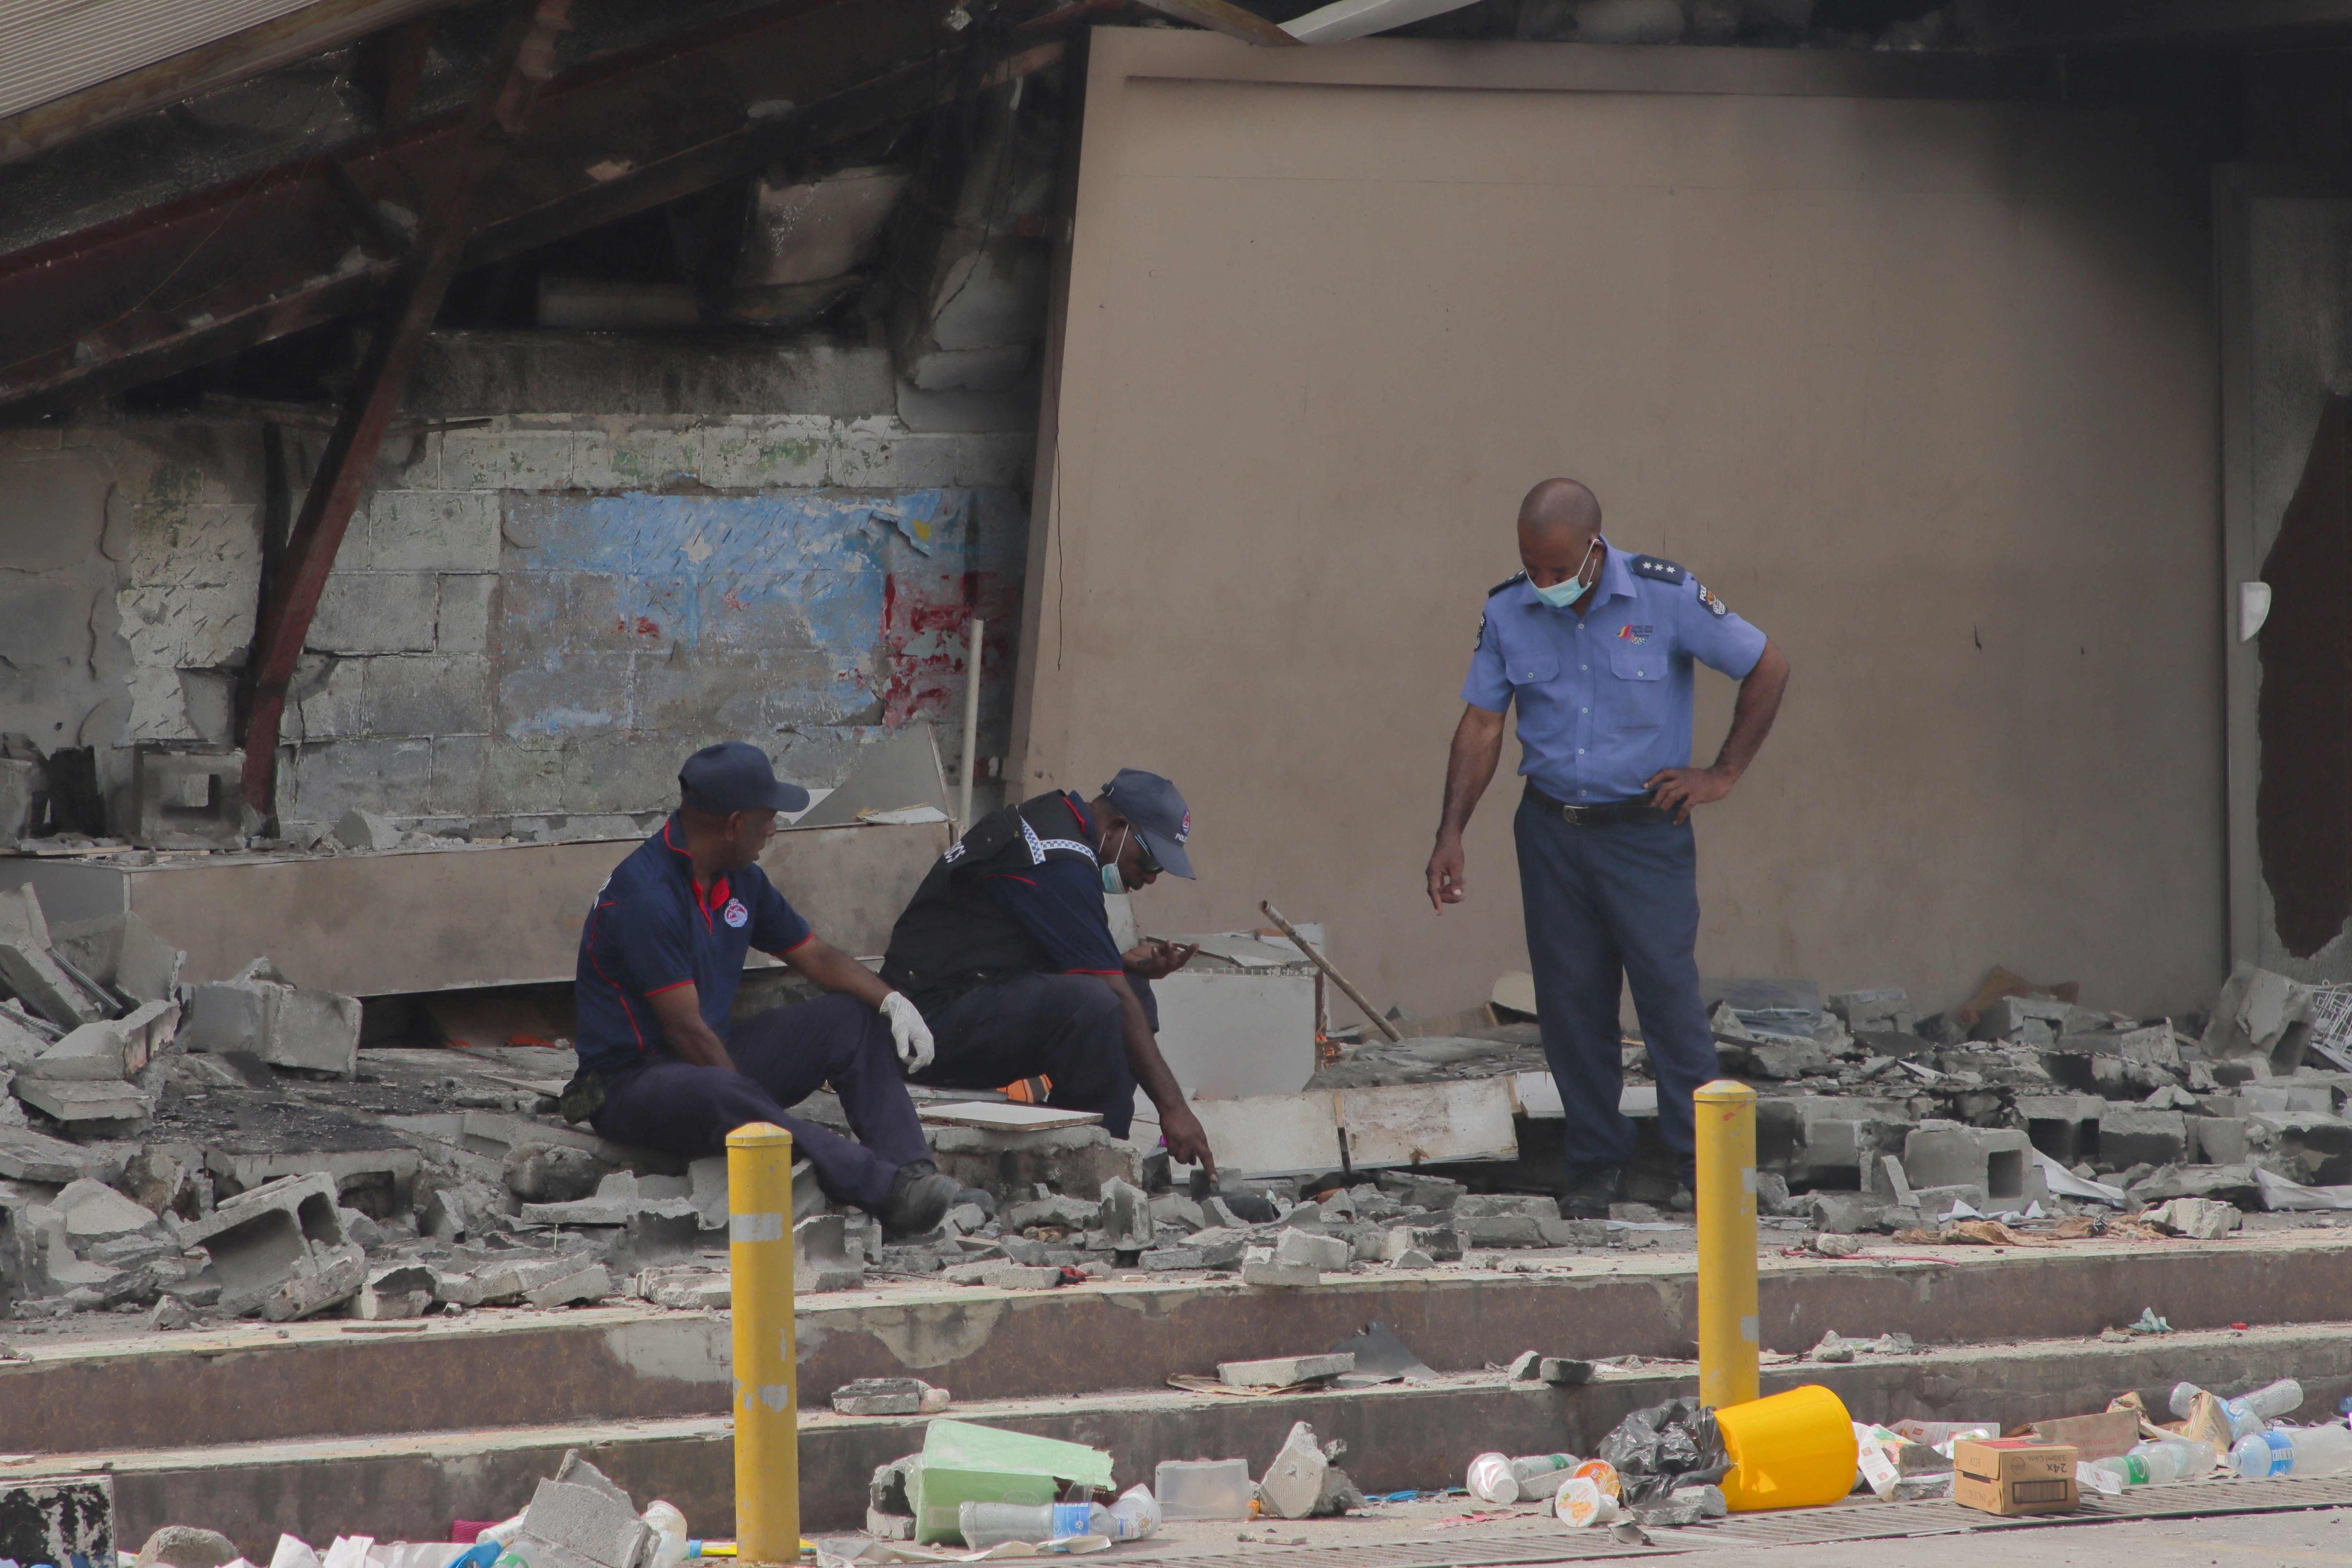 Police work at the site of a damaged building in Port Moresby on January 12 following deadly riots in Papua New Guinea’s capital. Photo: AFP